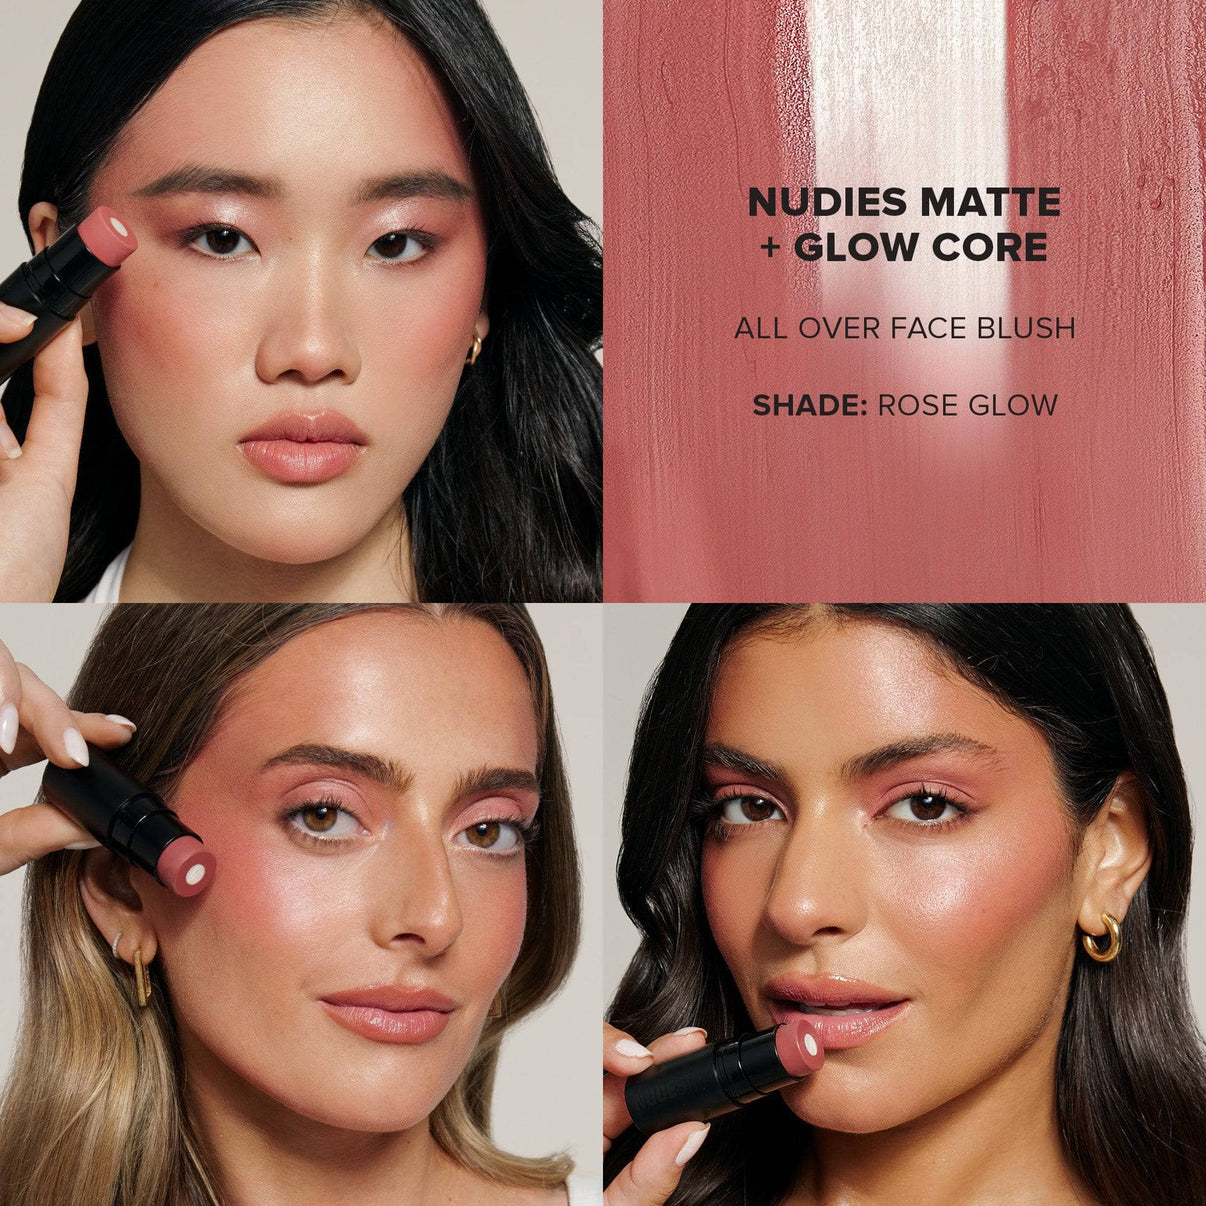 Grid with three models wearing Rose Glow from Pink Blush & Glow Core Kit - 6